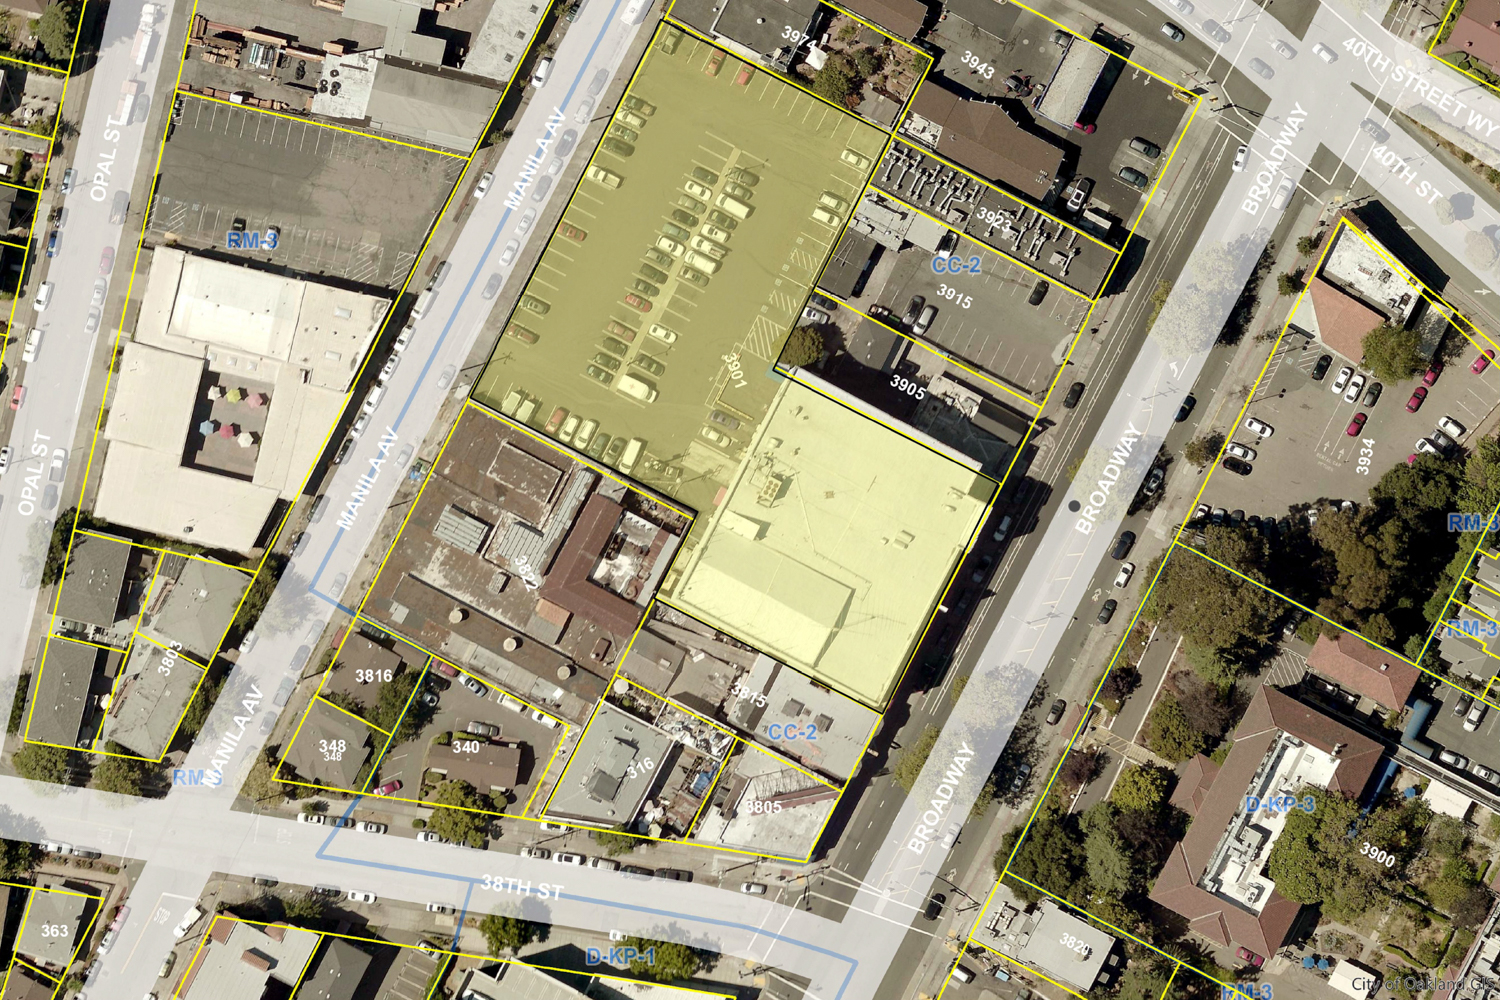 3903 Broadway existing site map, image by SmithGroup